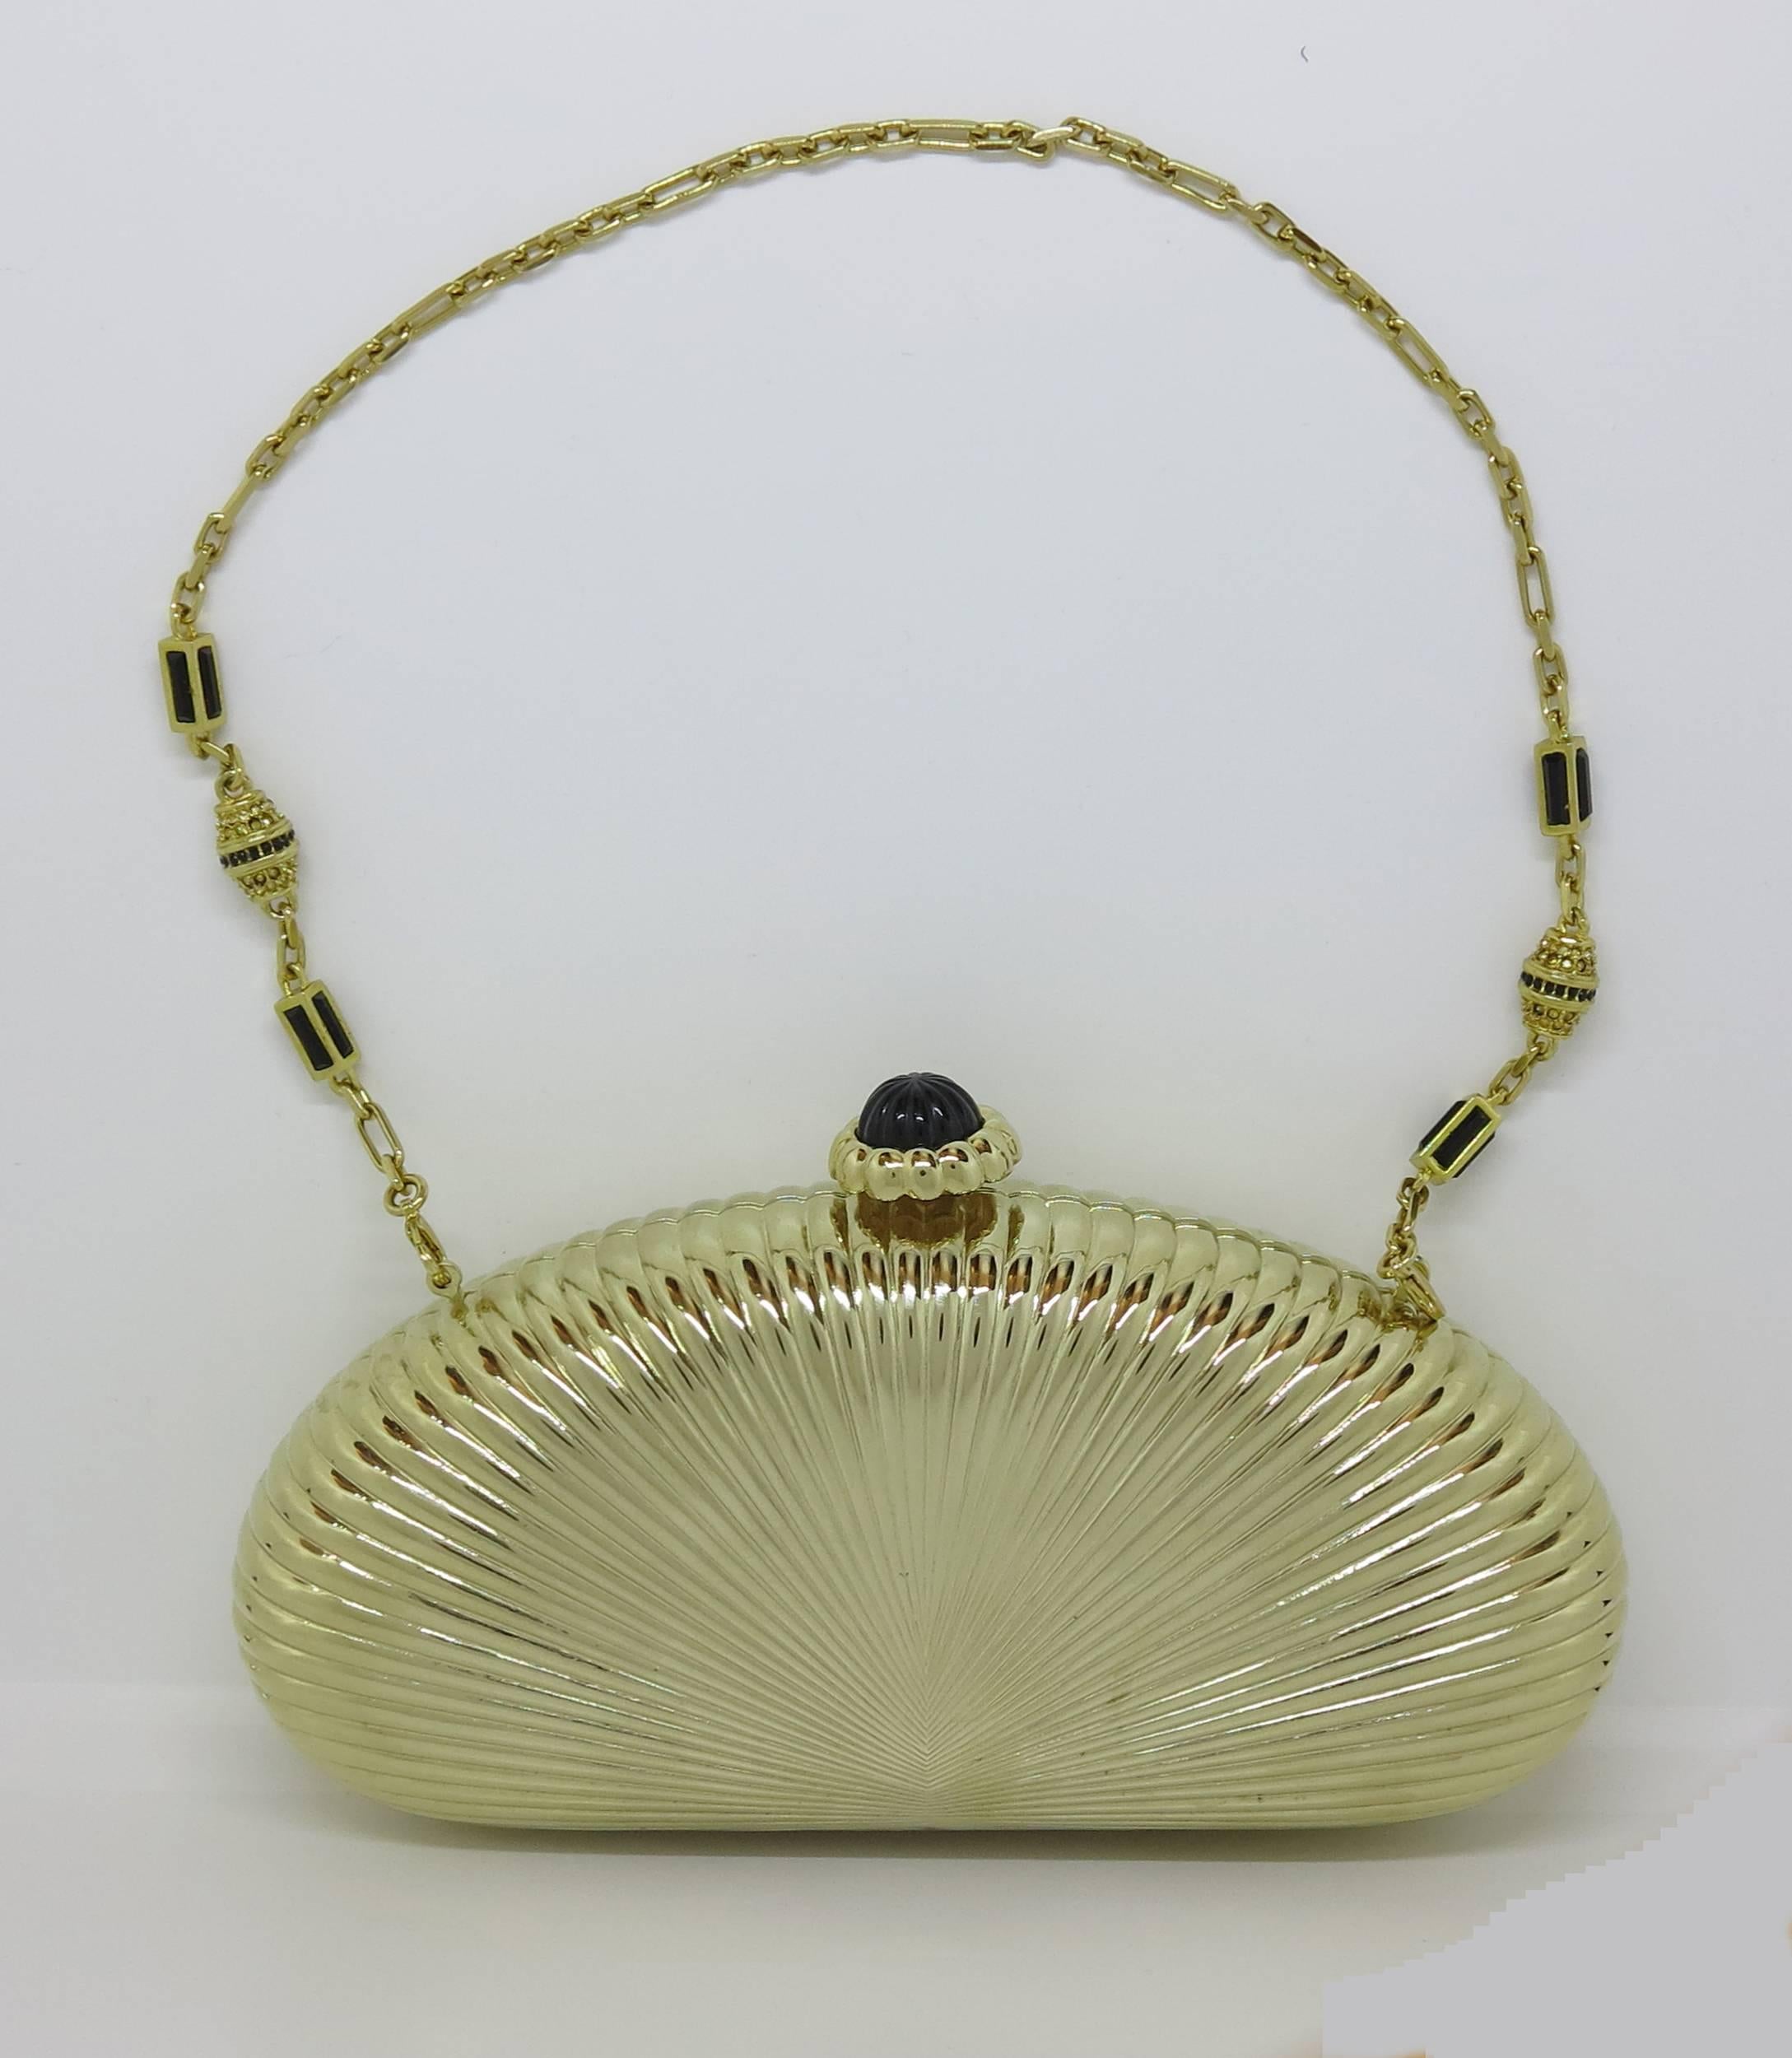 Judith Leiber gold sunburst hardside evening clutch or shoulder bag...Beautiful bag with jewel gold chain handle strap, press to open black stone set top...Interior lined in gold...Looks barely, if ever worn...original tag price $2695...Measurements